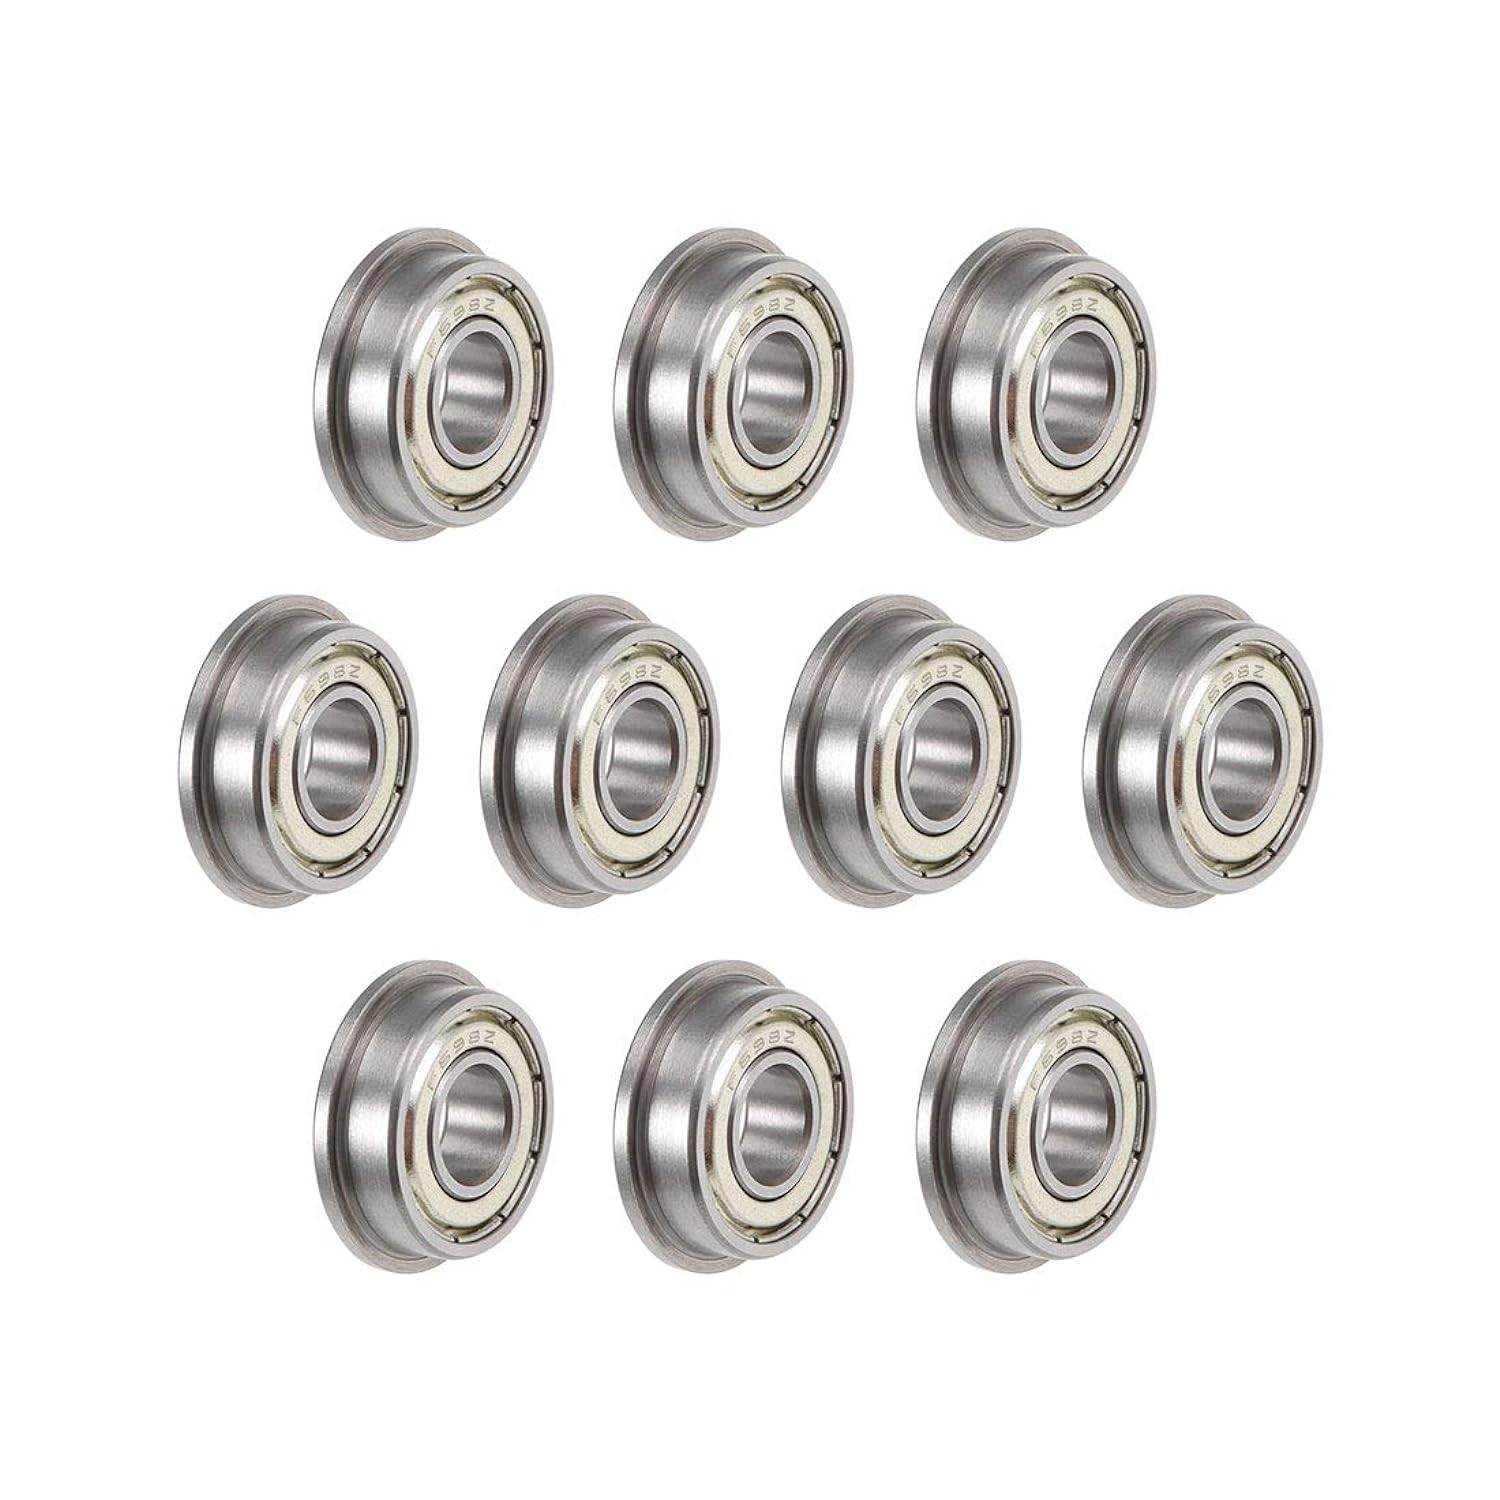 uxcell F698ZZ Flanged Ball Bearing 8mmx19mmx6mm Double Shielded Chrome Steel Deep Groove Bearings 10pcs